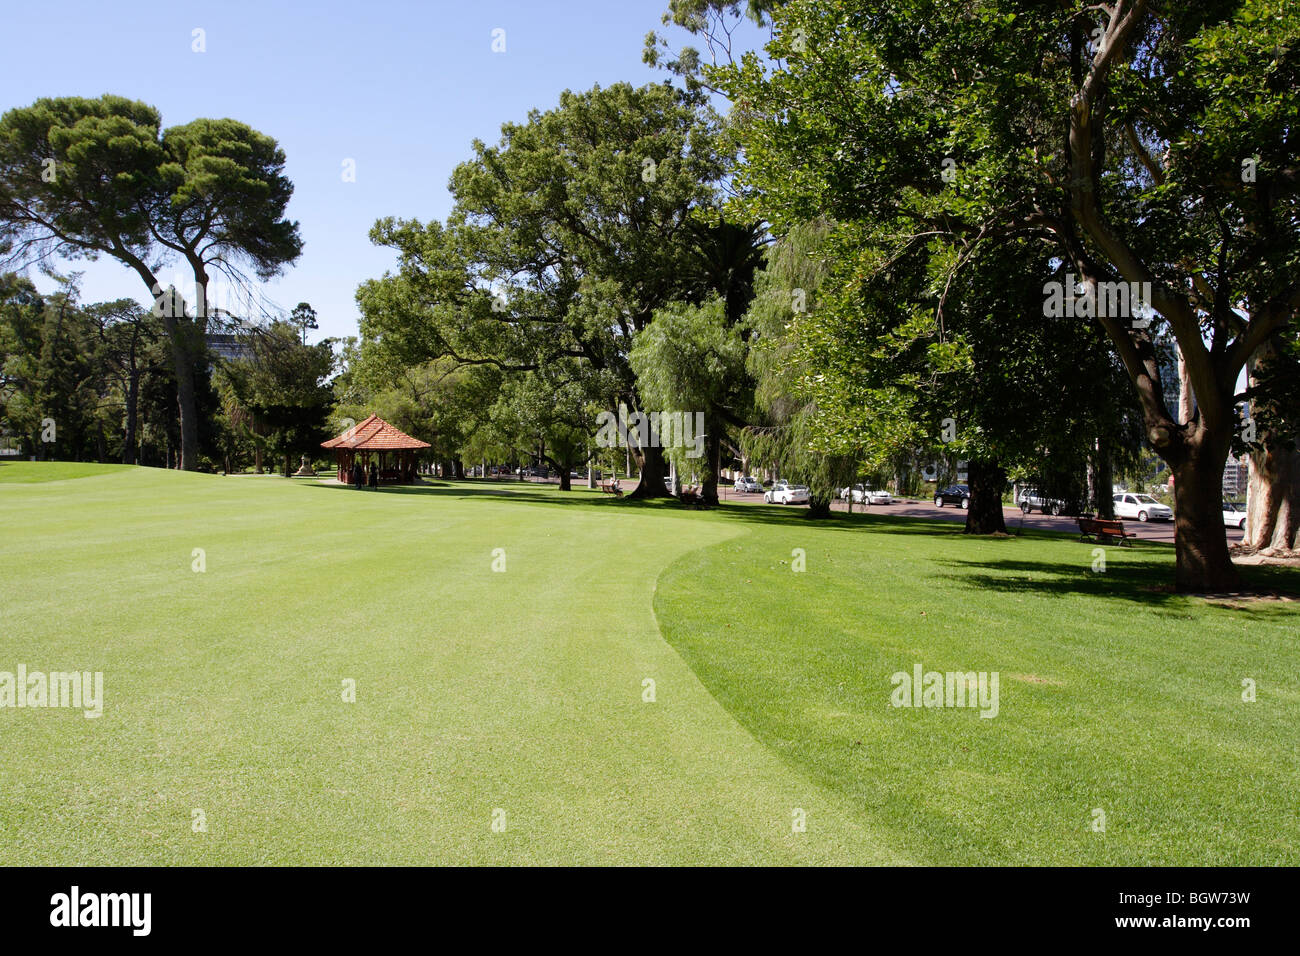 Very well maintained Terrace Garden at Kings Park in Perth, Western Australia. Stock Photo